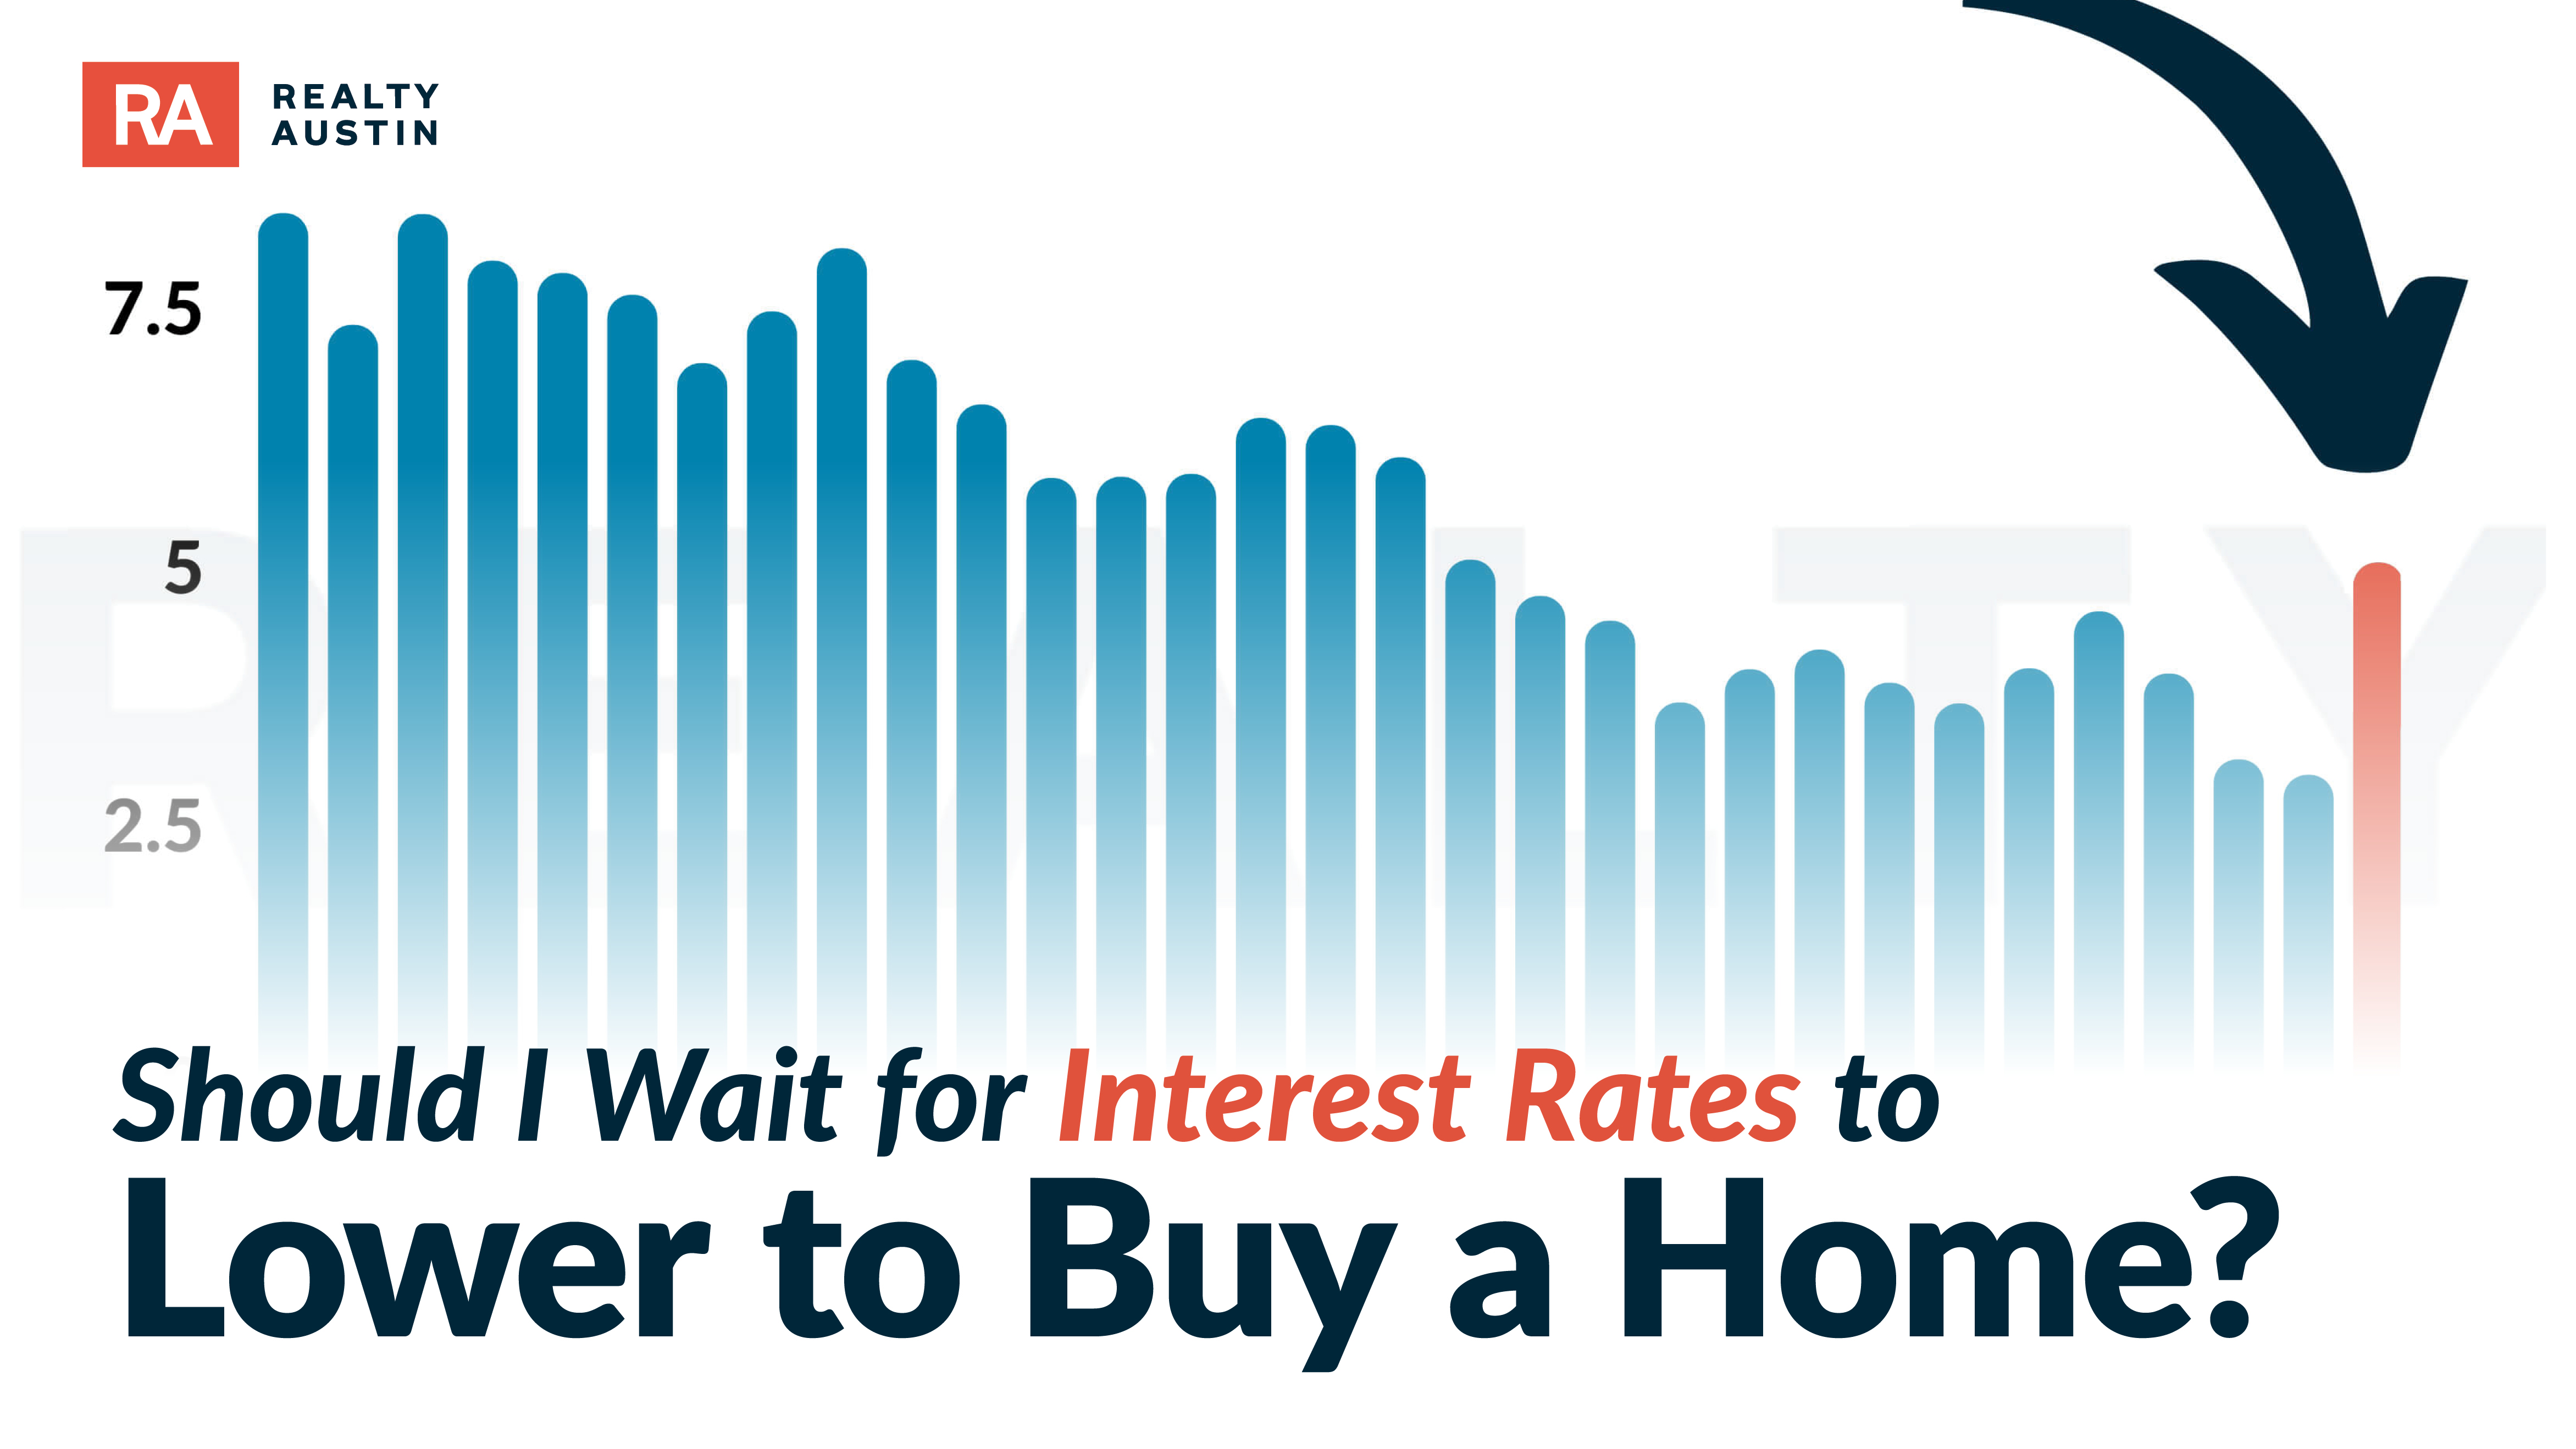 Will Mortgage Rates Go Down? Realty Austin